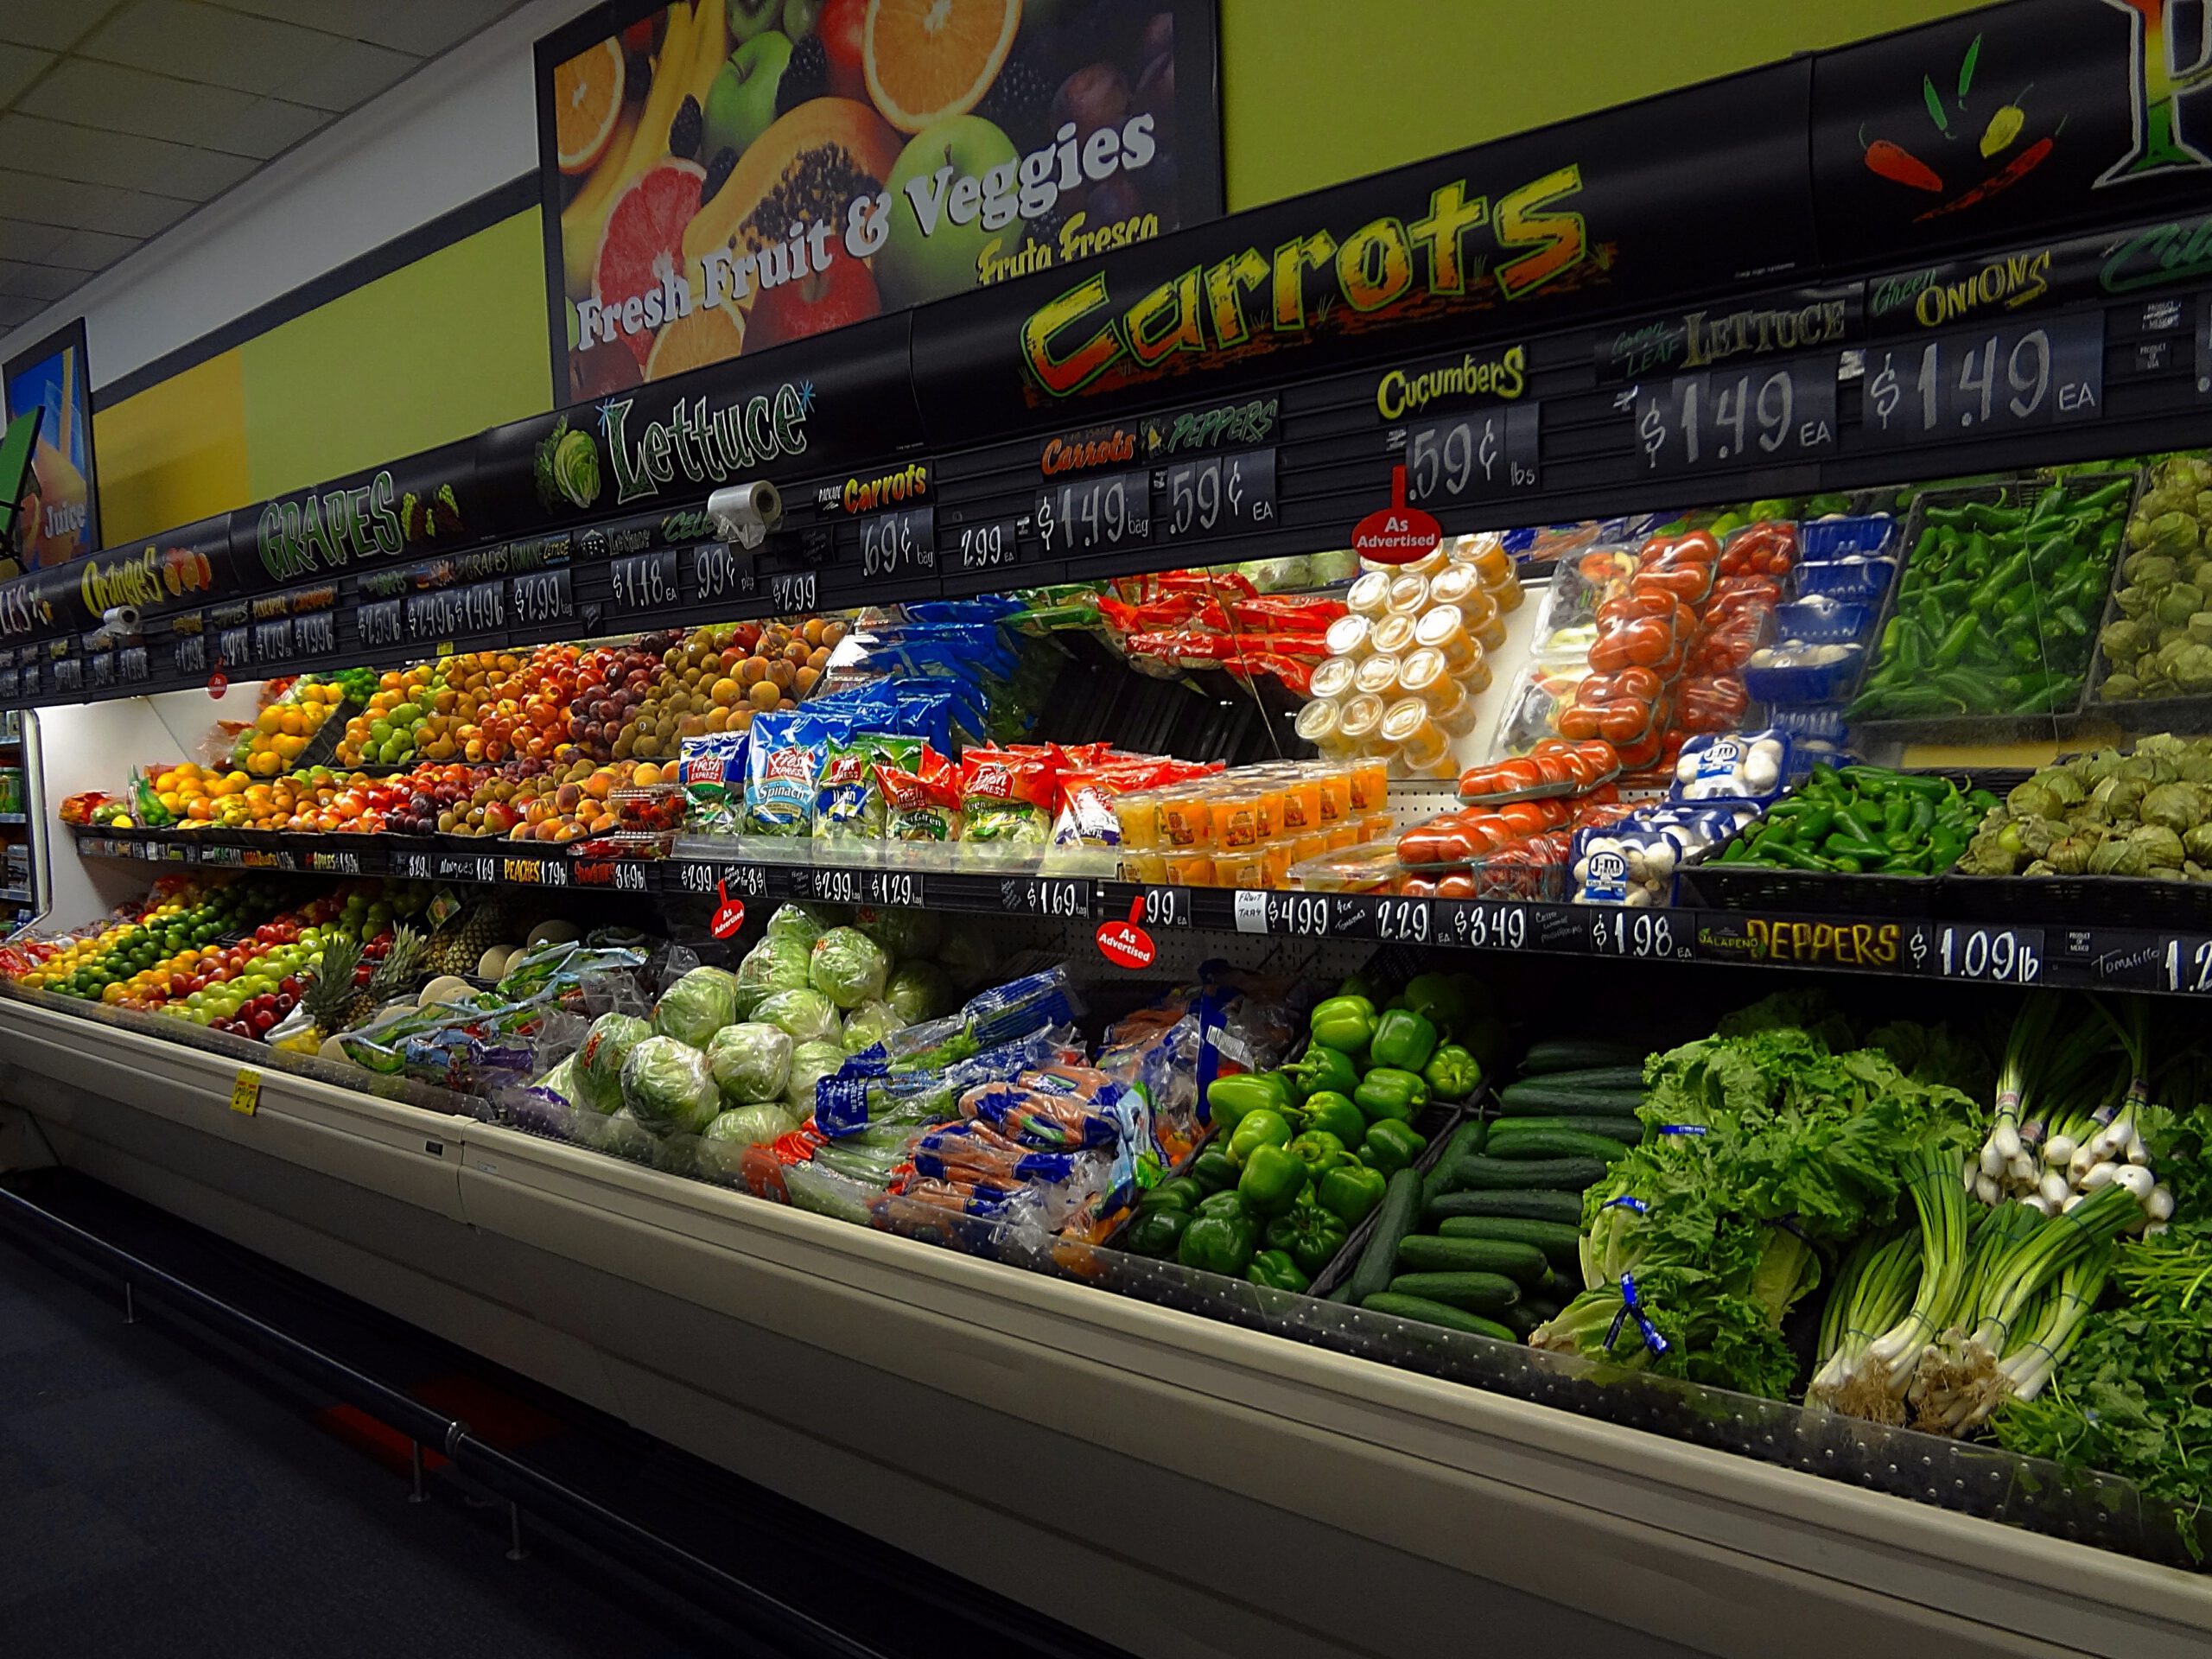 In-store events, easy options and other health trends in food retail this year